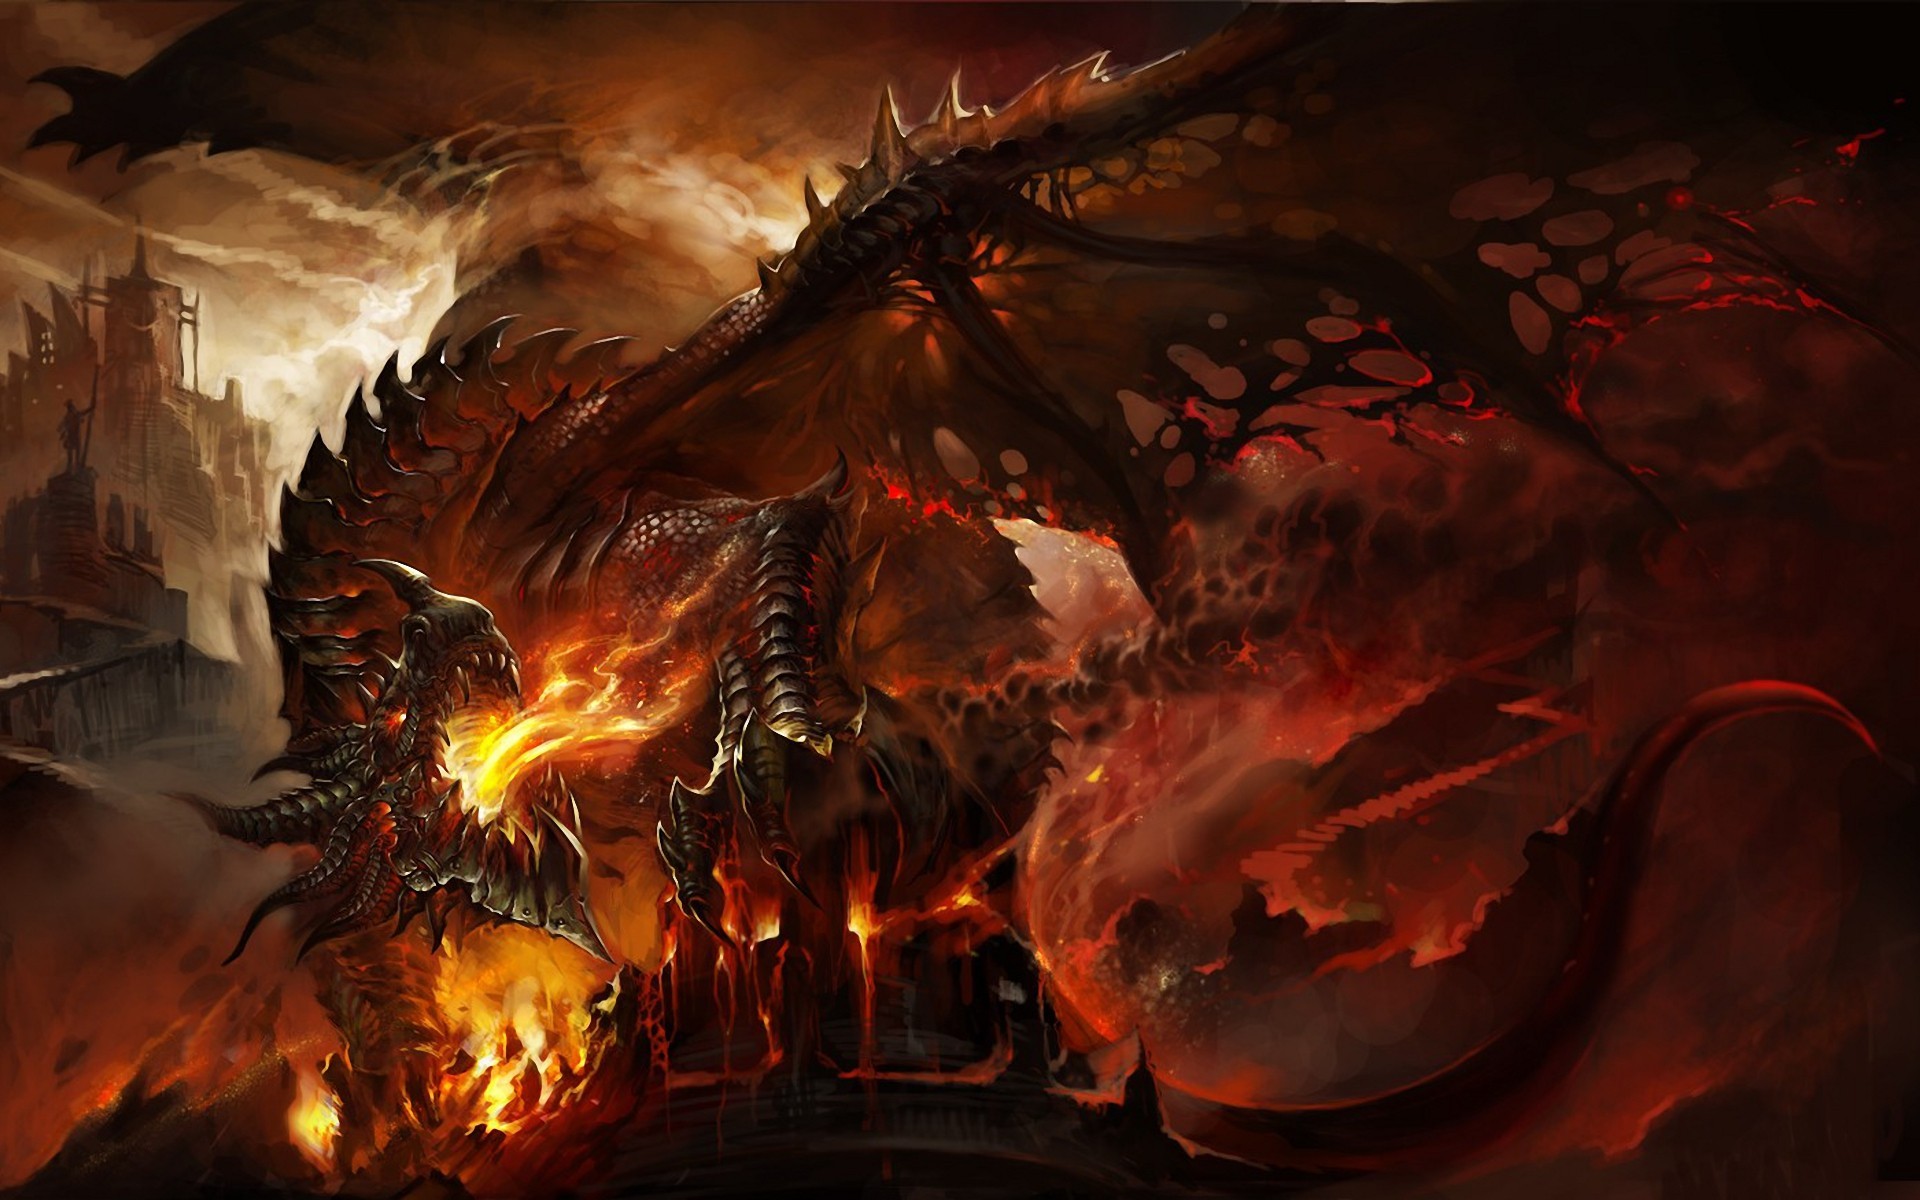 1920x1200 Awesome Dragons Pics for Desktop: 01.14.17